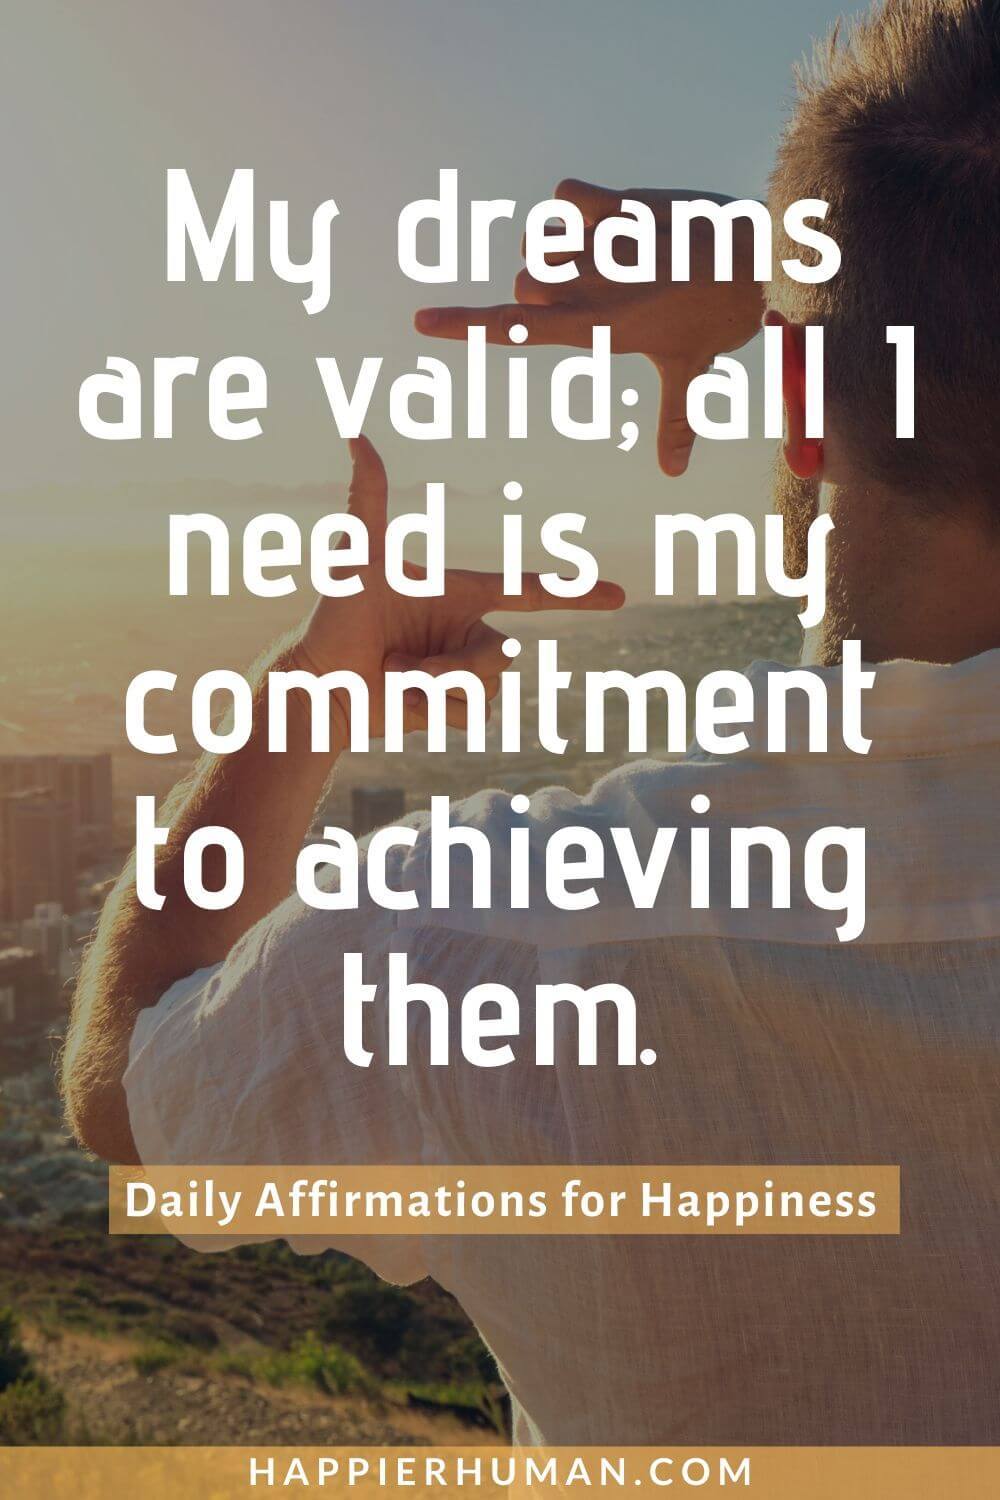 Daily Affirmations for Happiness - My dreams are valid; all I need is my commitment to achieving them. | affirmations for confidence | you are affirmations | affirmations for motivation #affirmationswork #quotes #sayings